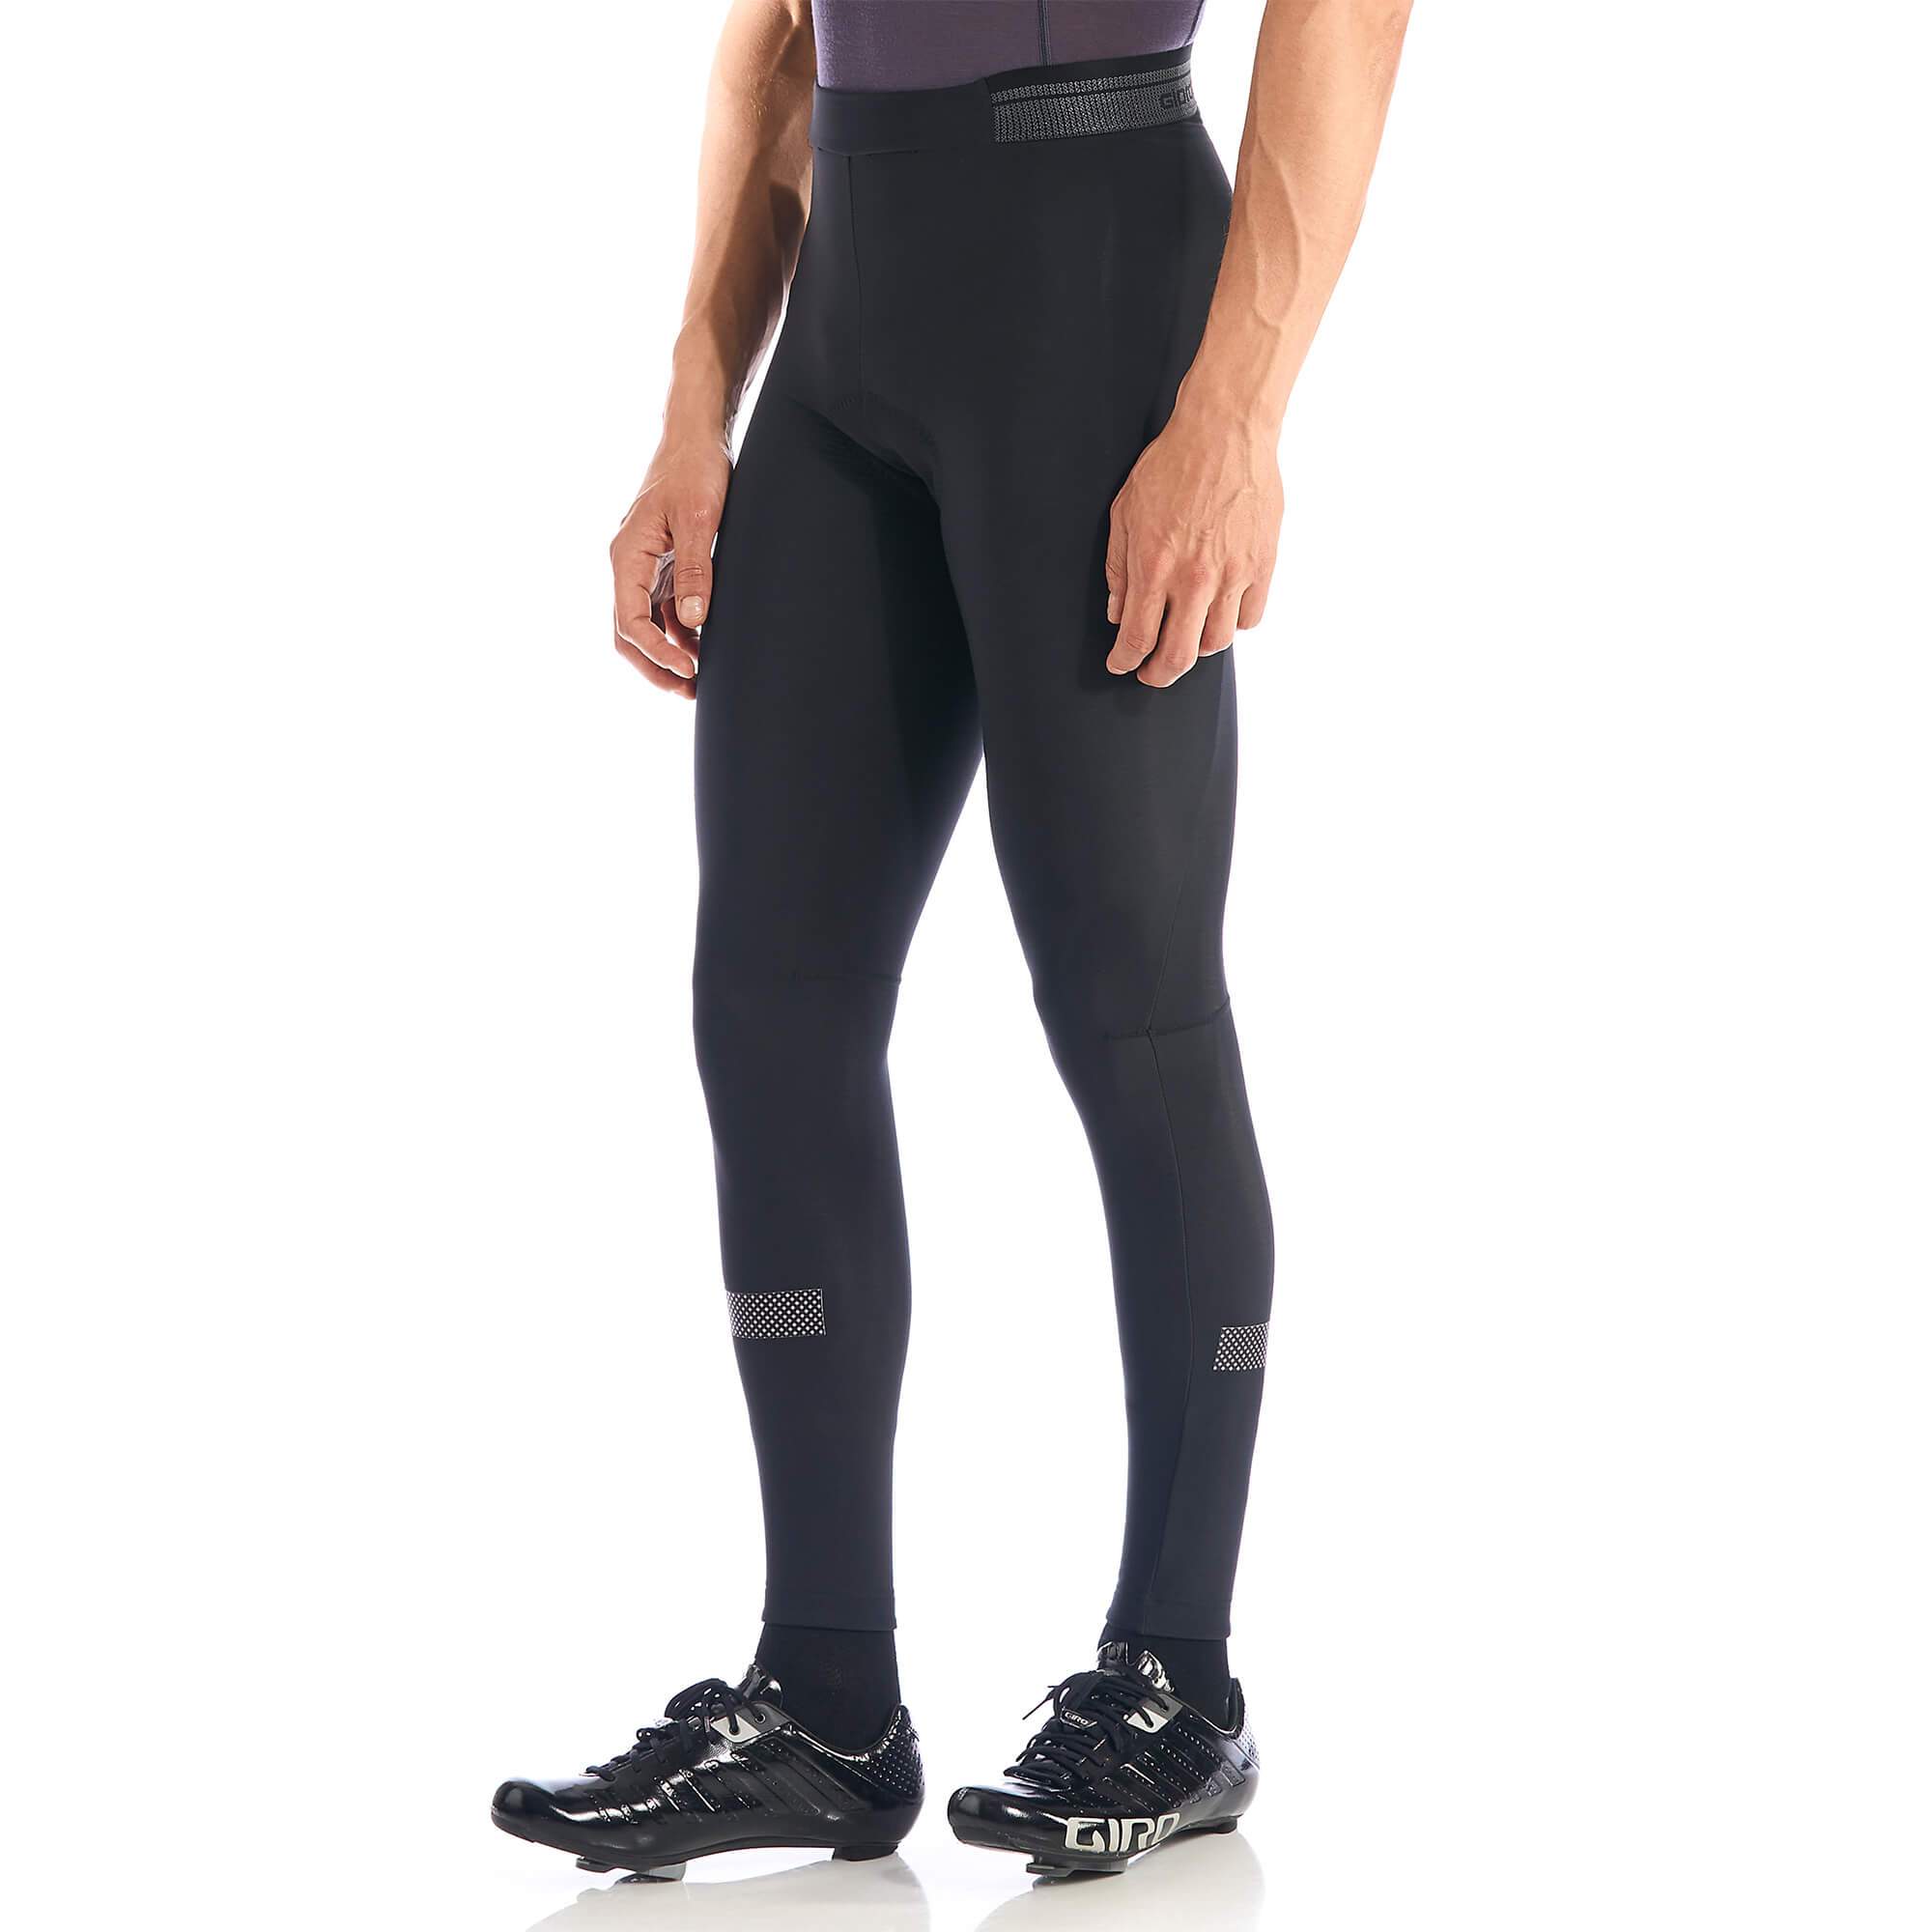 Men's SilverLine Thermal Tight, 54% OFF